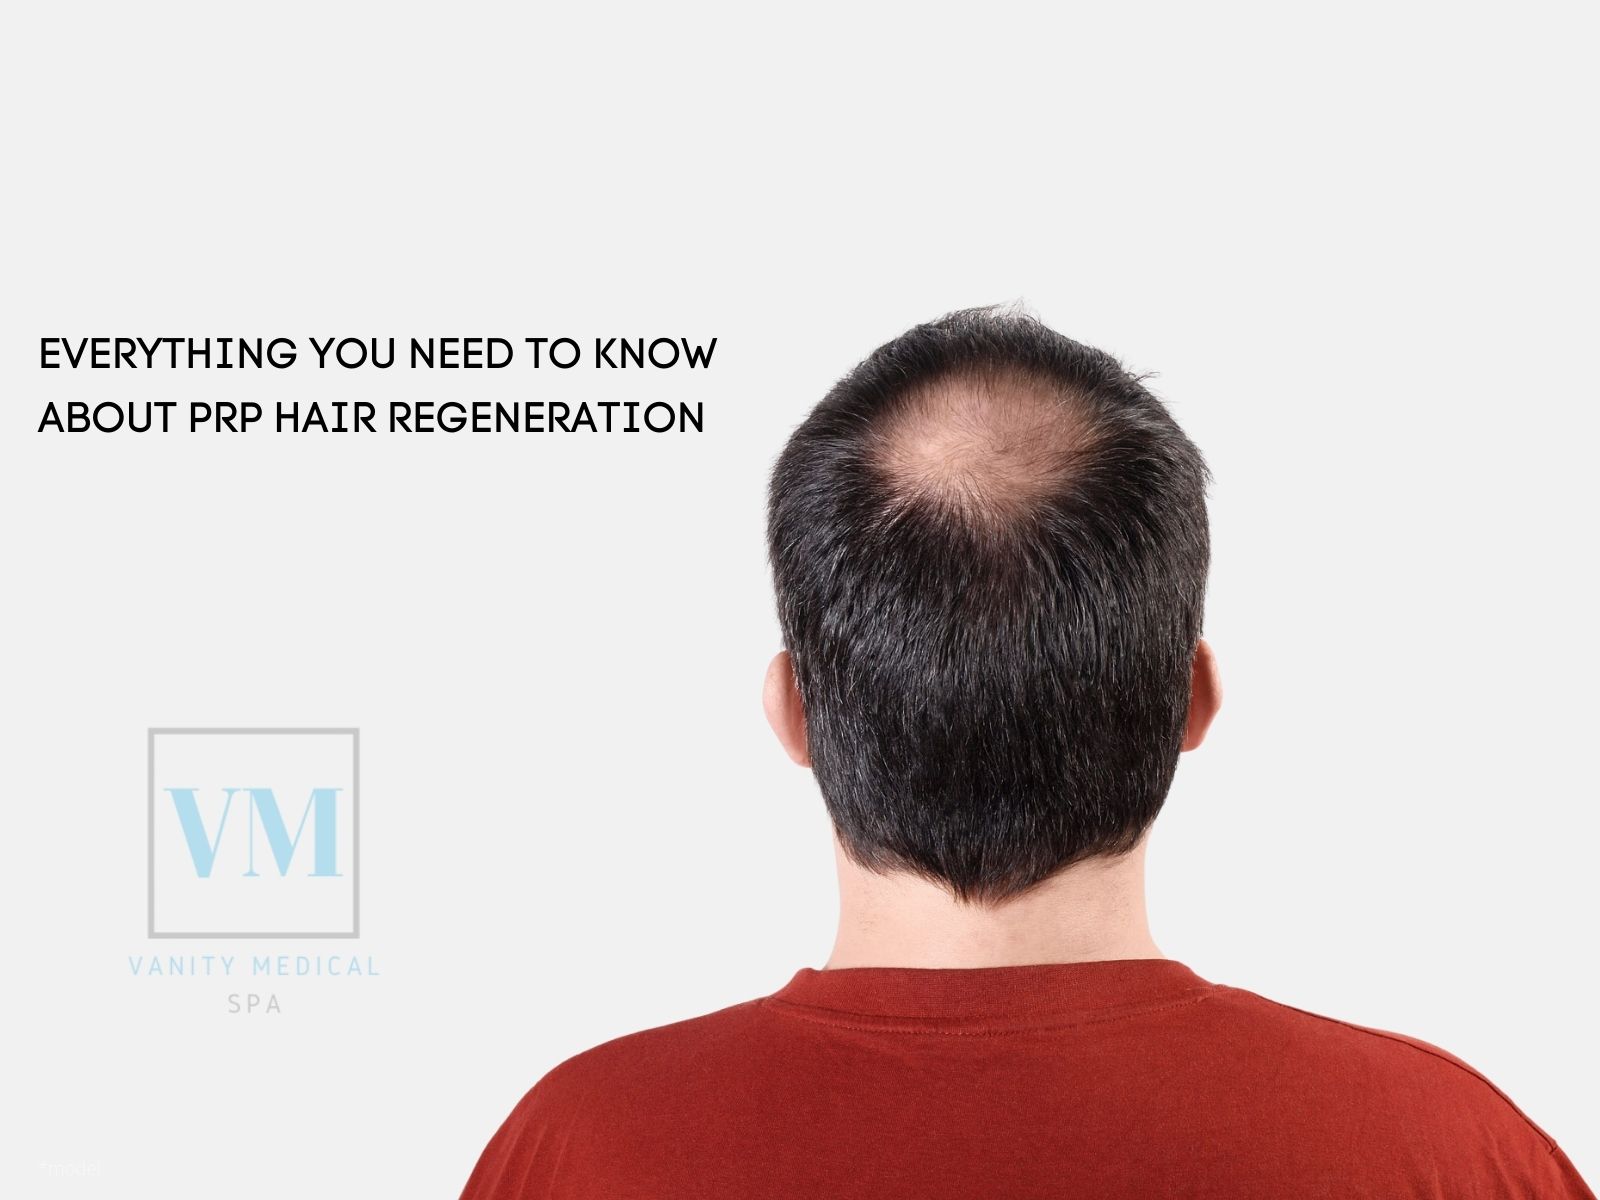 Everything You Need to Know About PRP Hair Regeneration